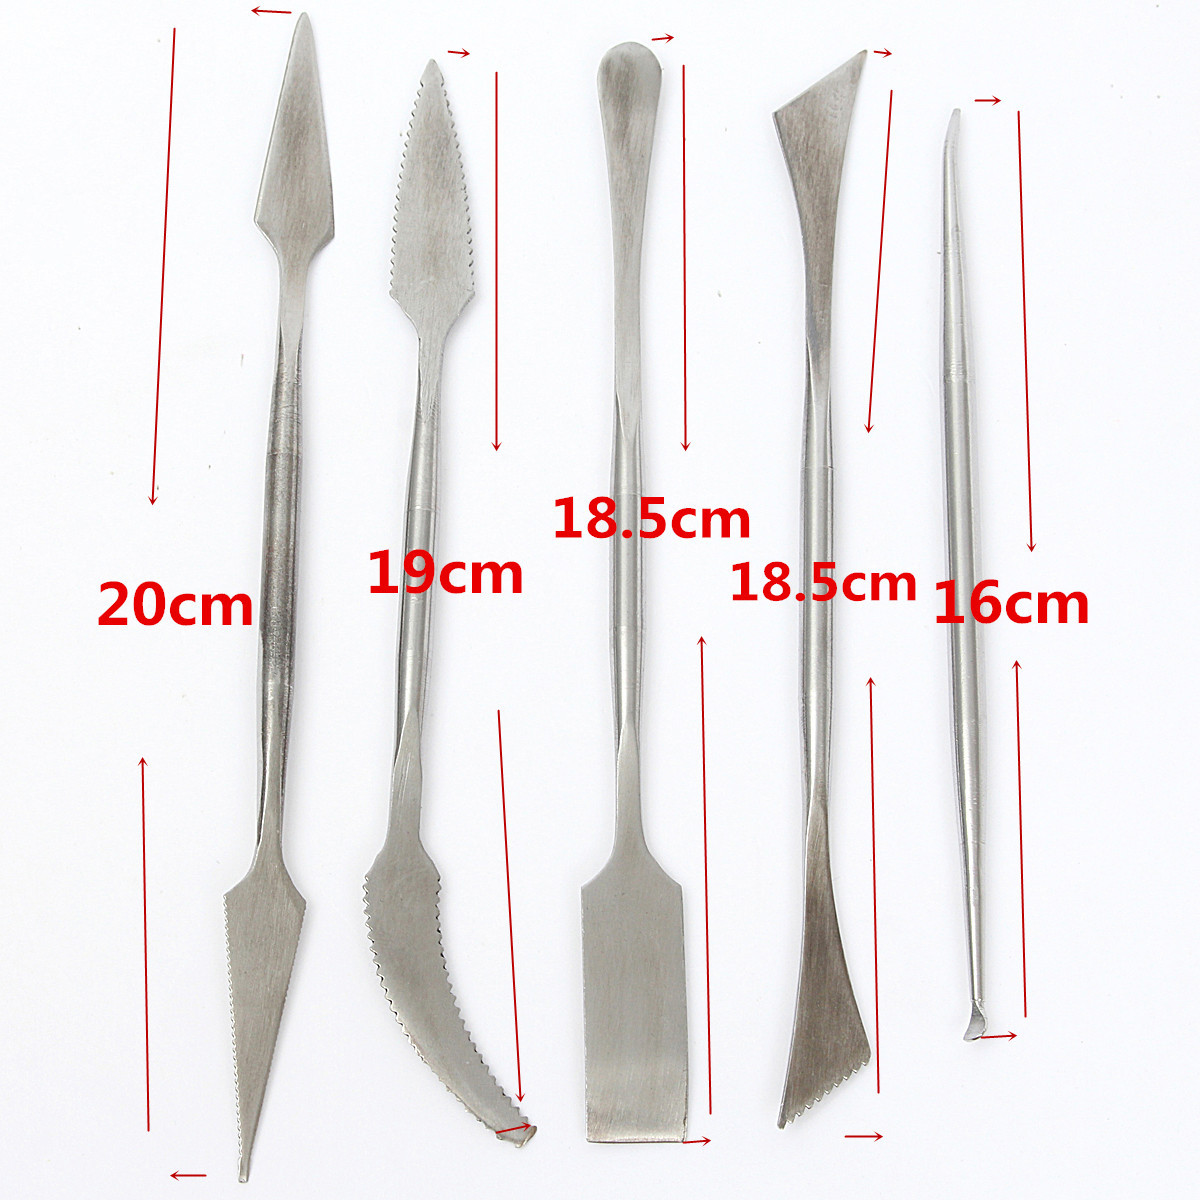 5Pcsset-Clay-Scrapers-Stainless-Steel-Clay-Sculpting-Tools-Carving-Pottery-Tools-Artist-Supplies-1771272-1